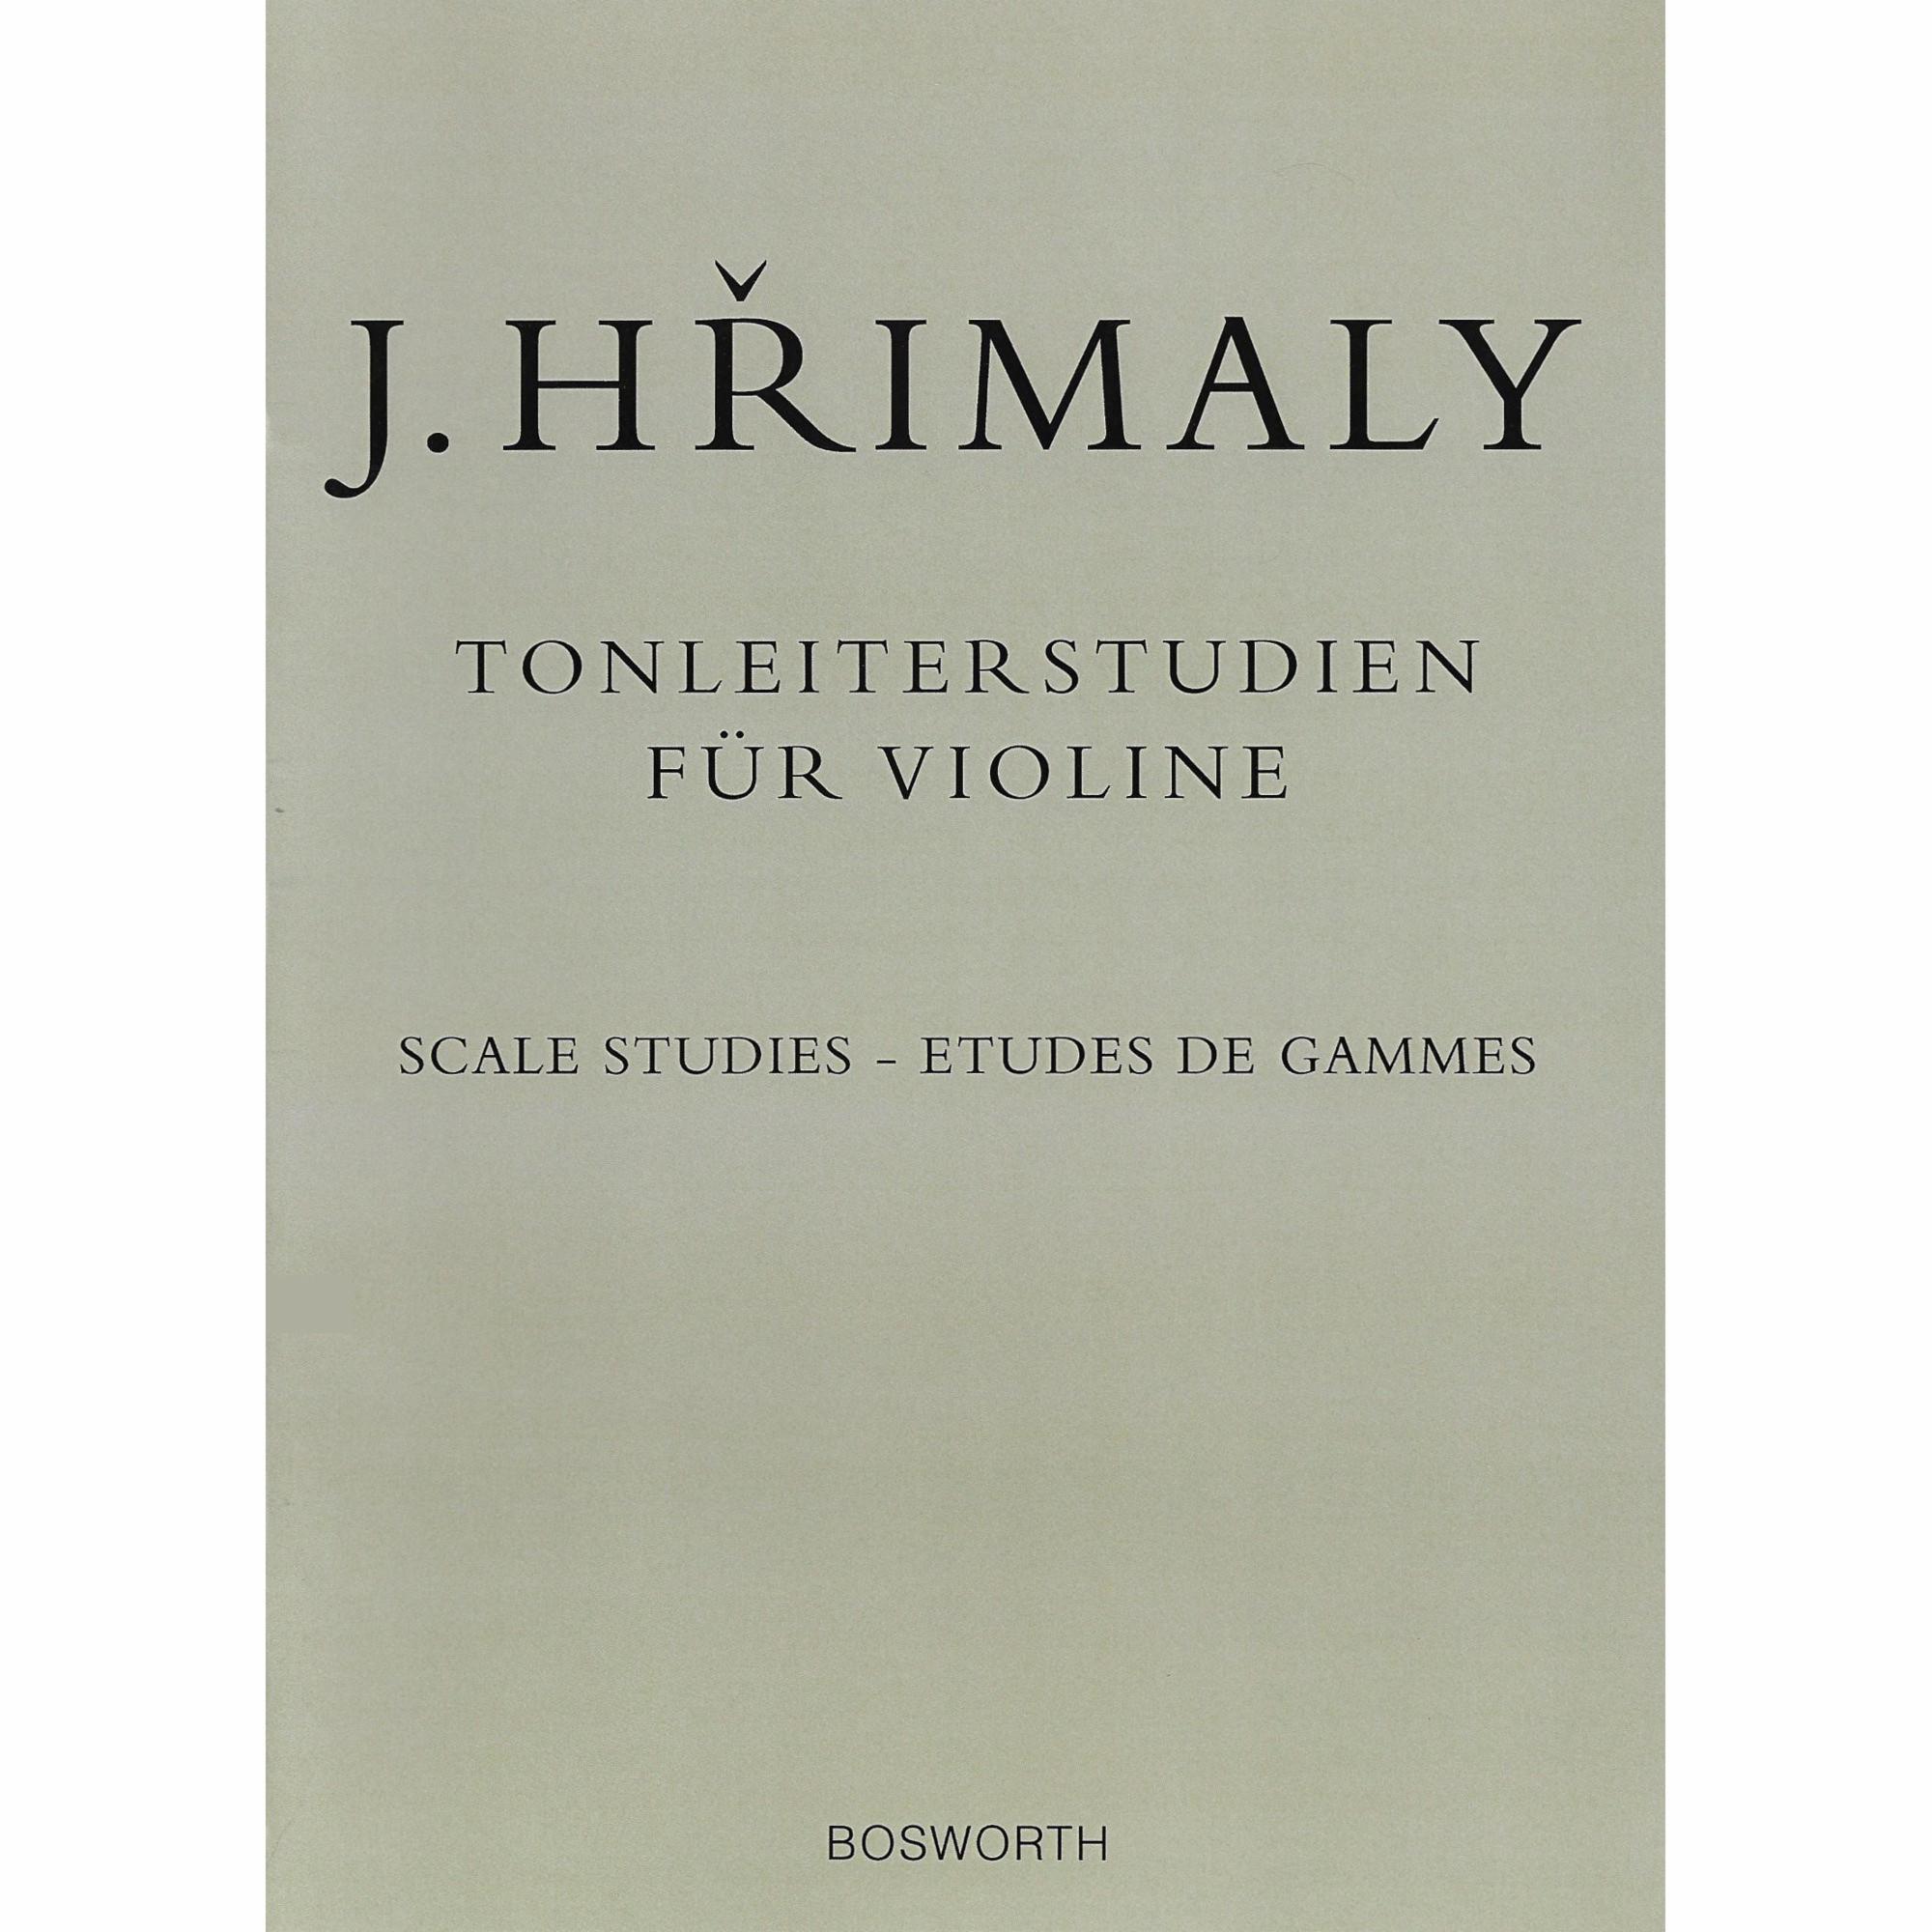 Hrimaly -- Scale Studies for Violin